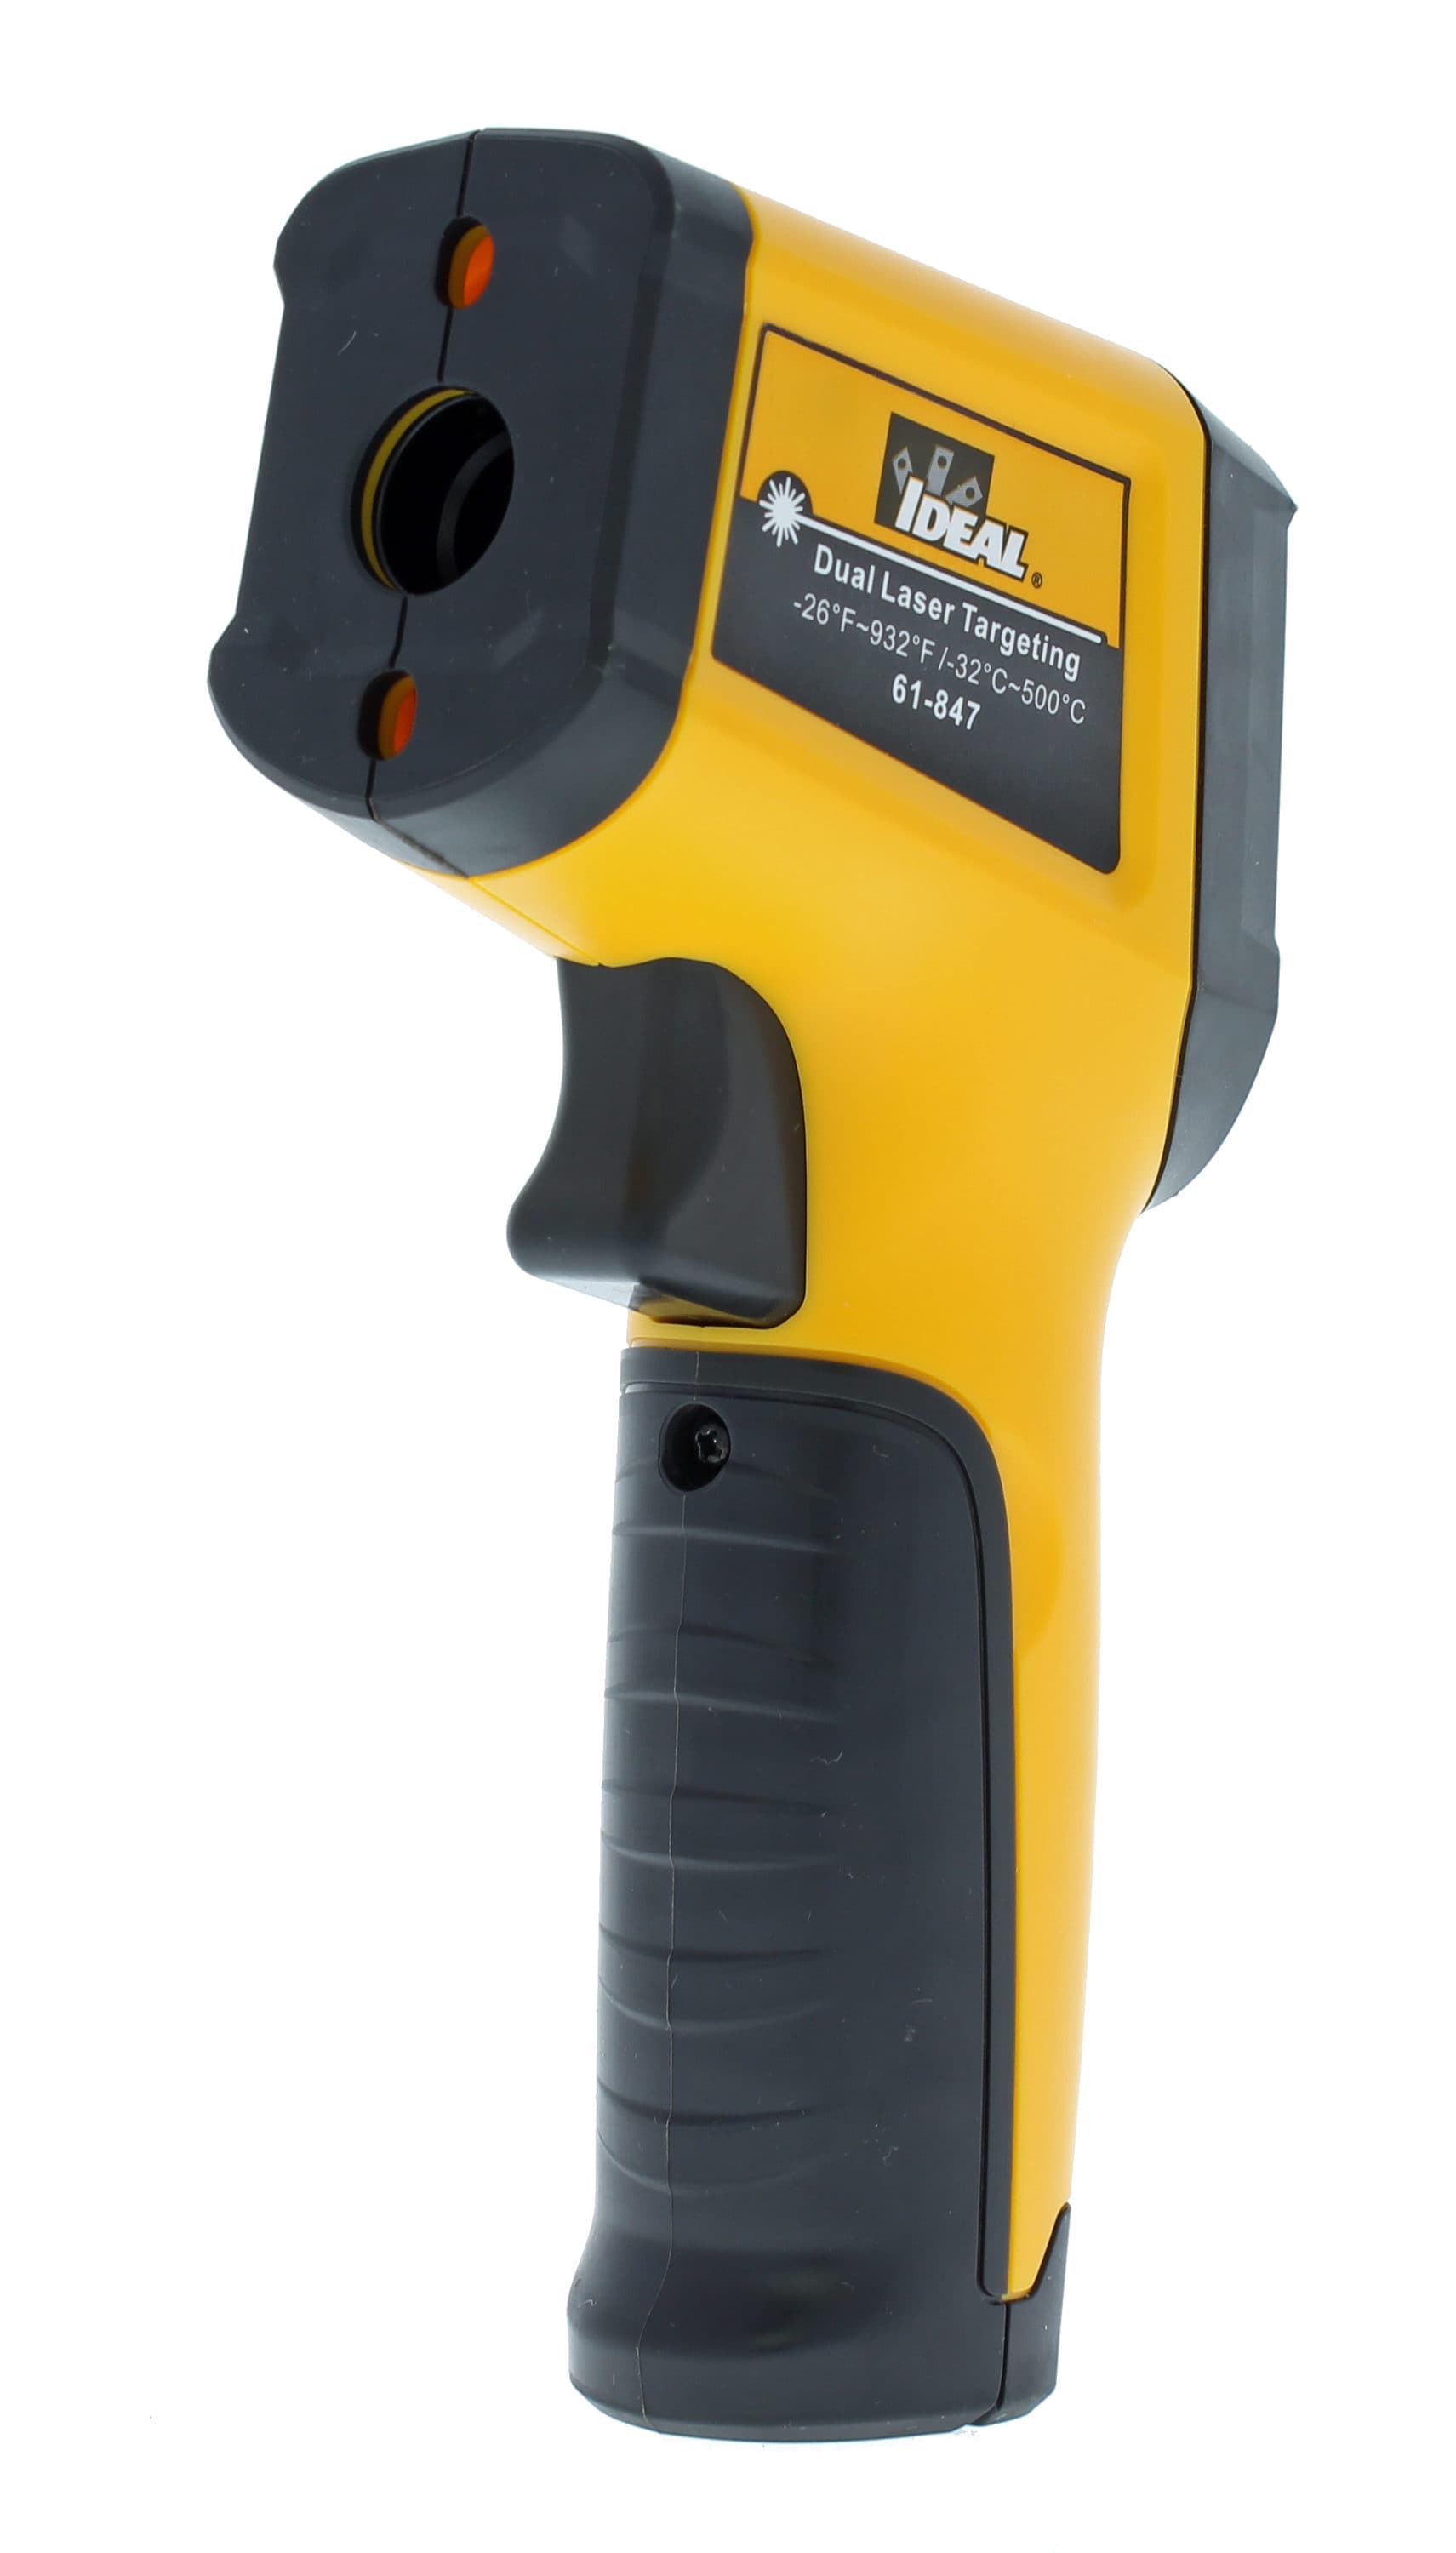 Ideal 61-847 - Dual Laser Targeting Infrared Thermometer